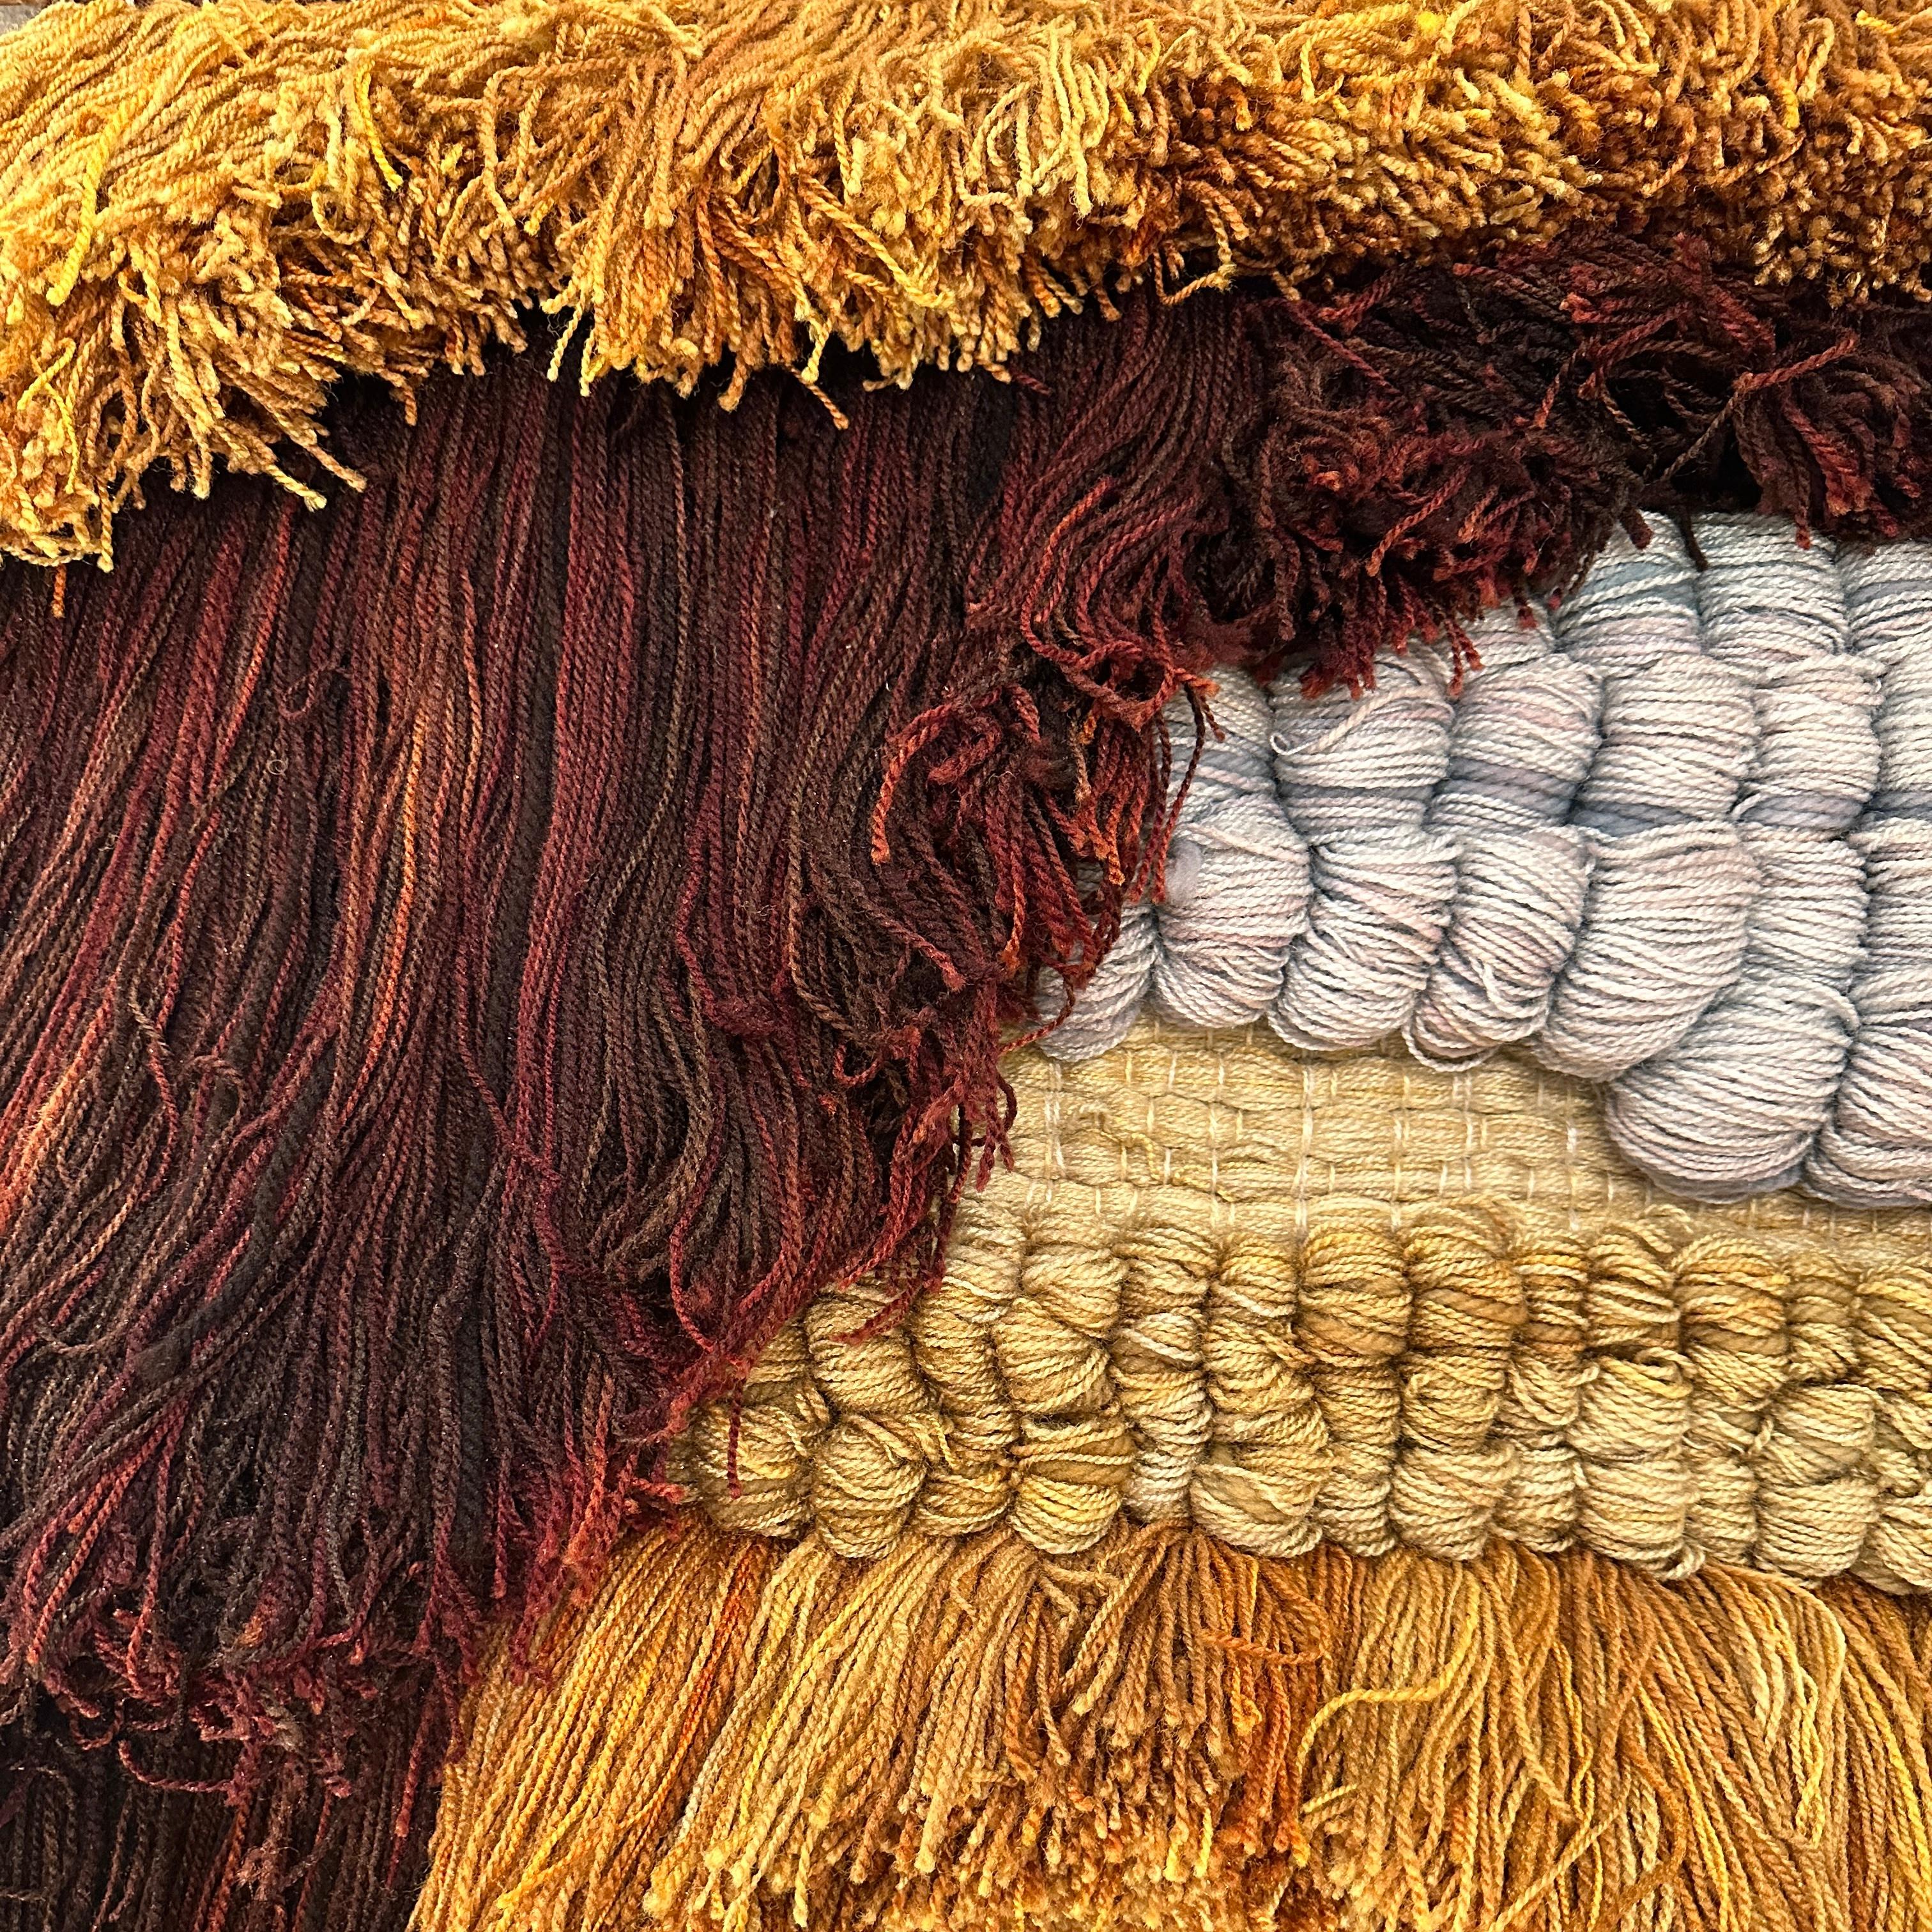 Hand-Woven Margo Farrin O’Connor for Ted Morris & Associates Large Fiber Art Wall Hanging